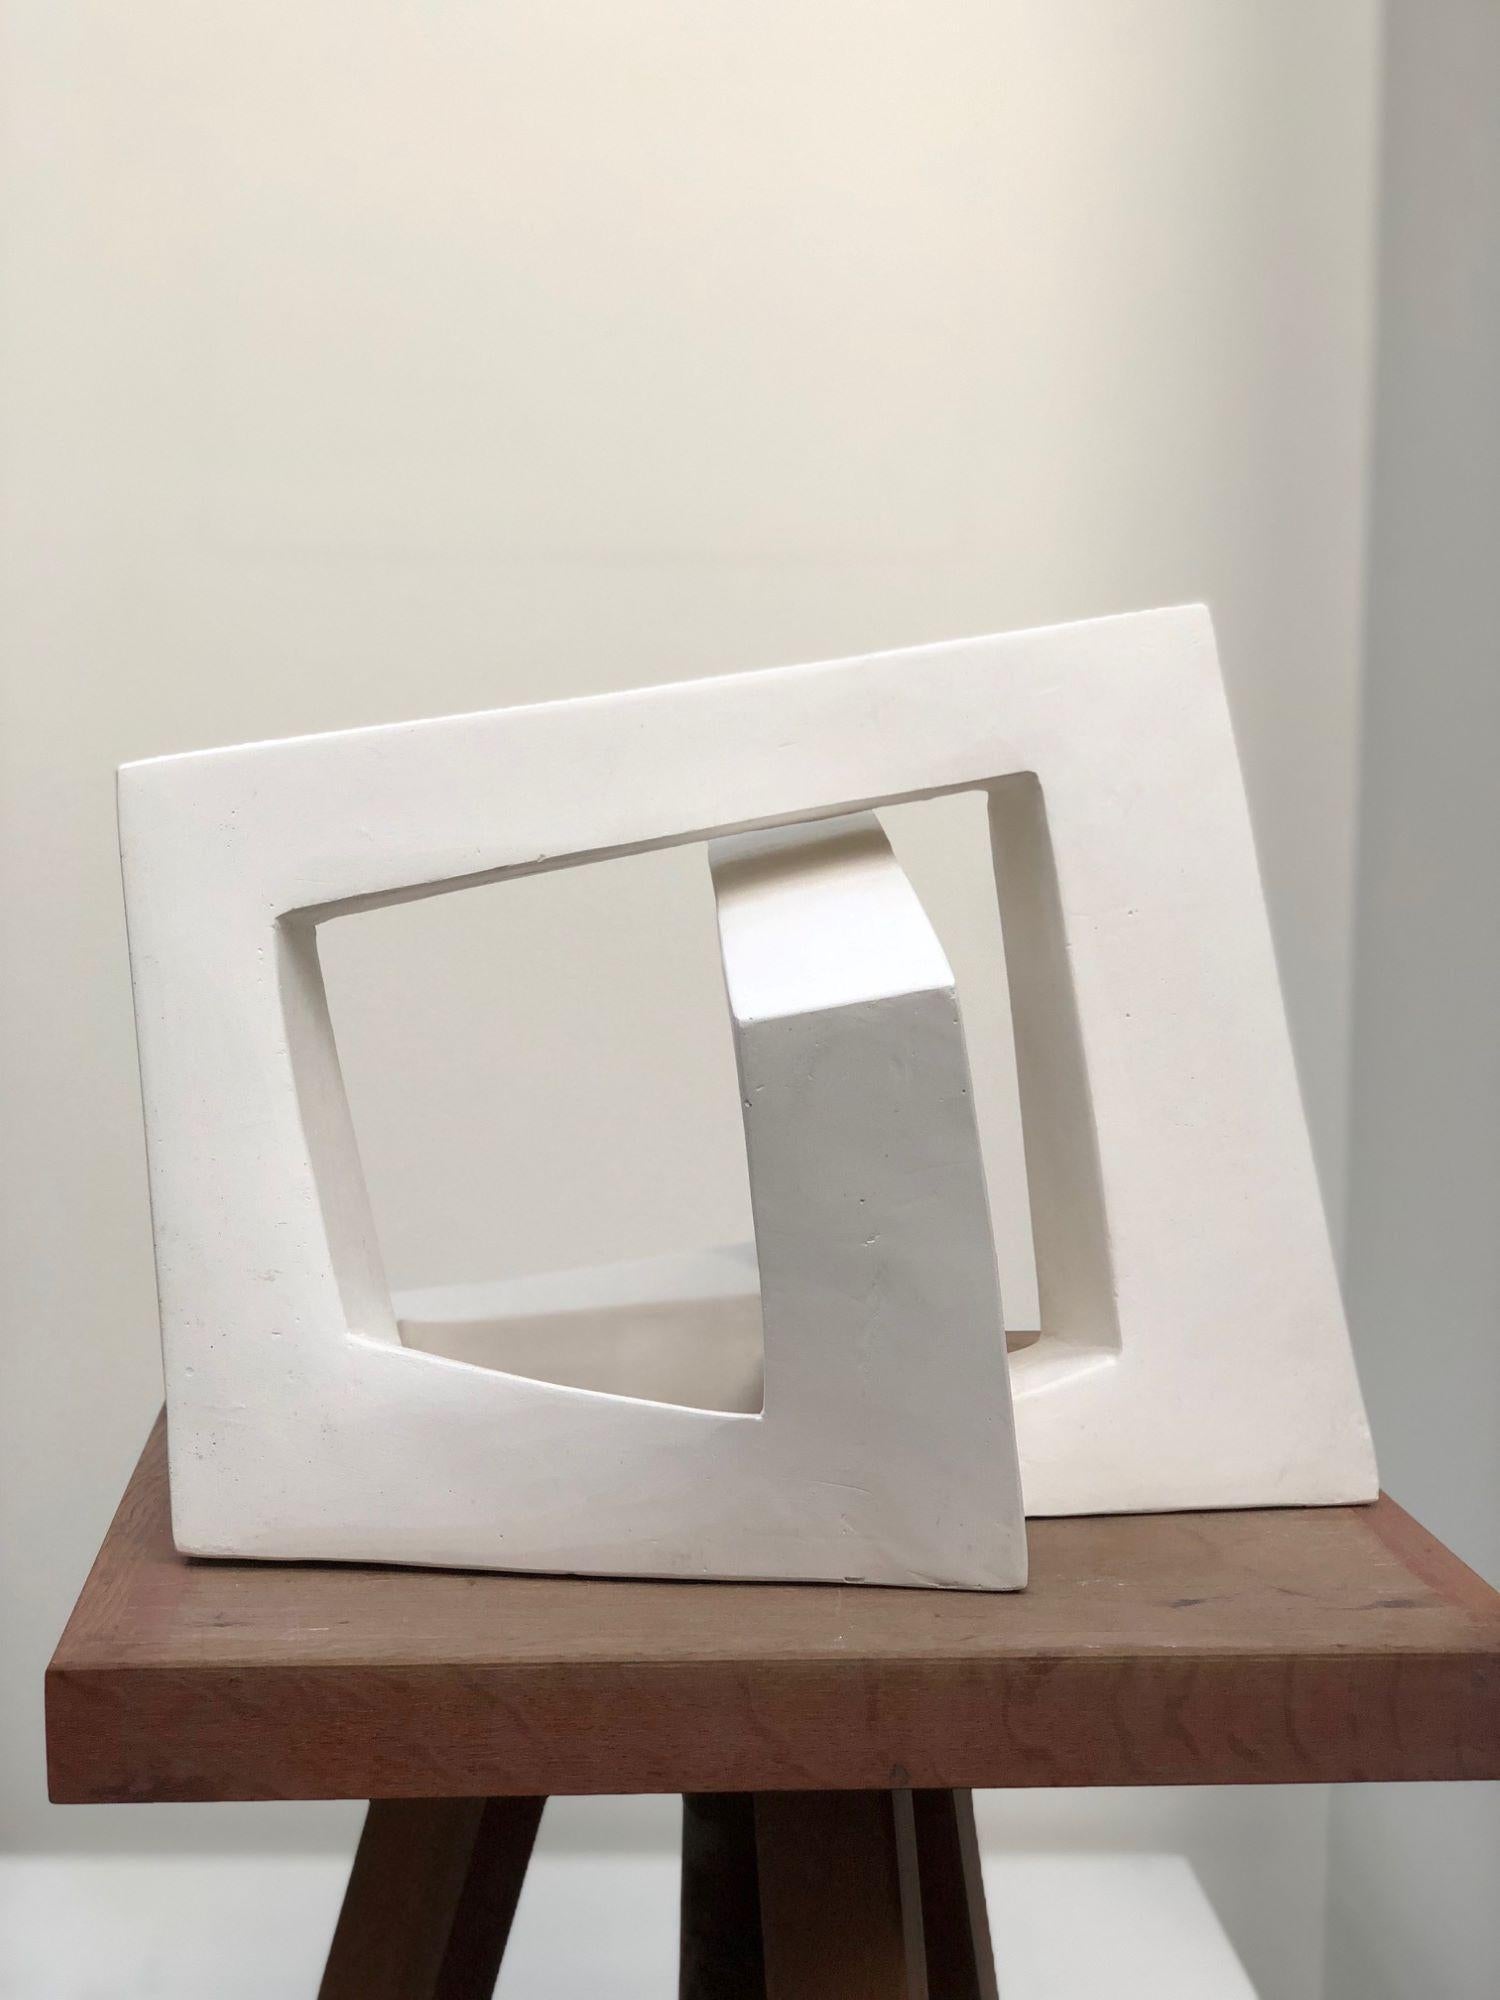 Arch is a plaster sculpture by contemporary artist Delphine Brabant, dimensions are 35 × 32 × 29 cm (13.8 × 12.6 × 11.4 in). 
The sculpture is signed and numbered, it is part of a limited edition of 8 editions + 4 artist’s proofs, and comes with a